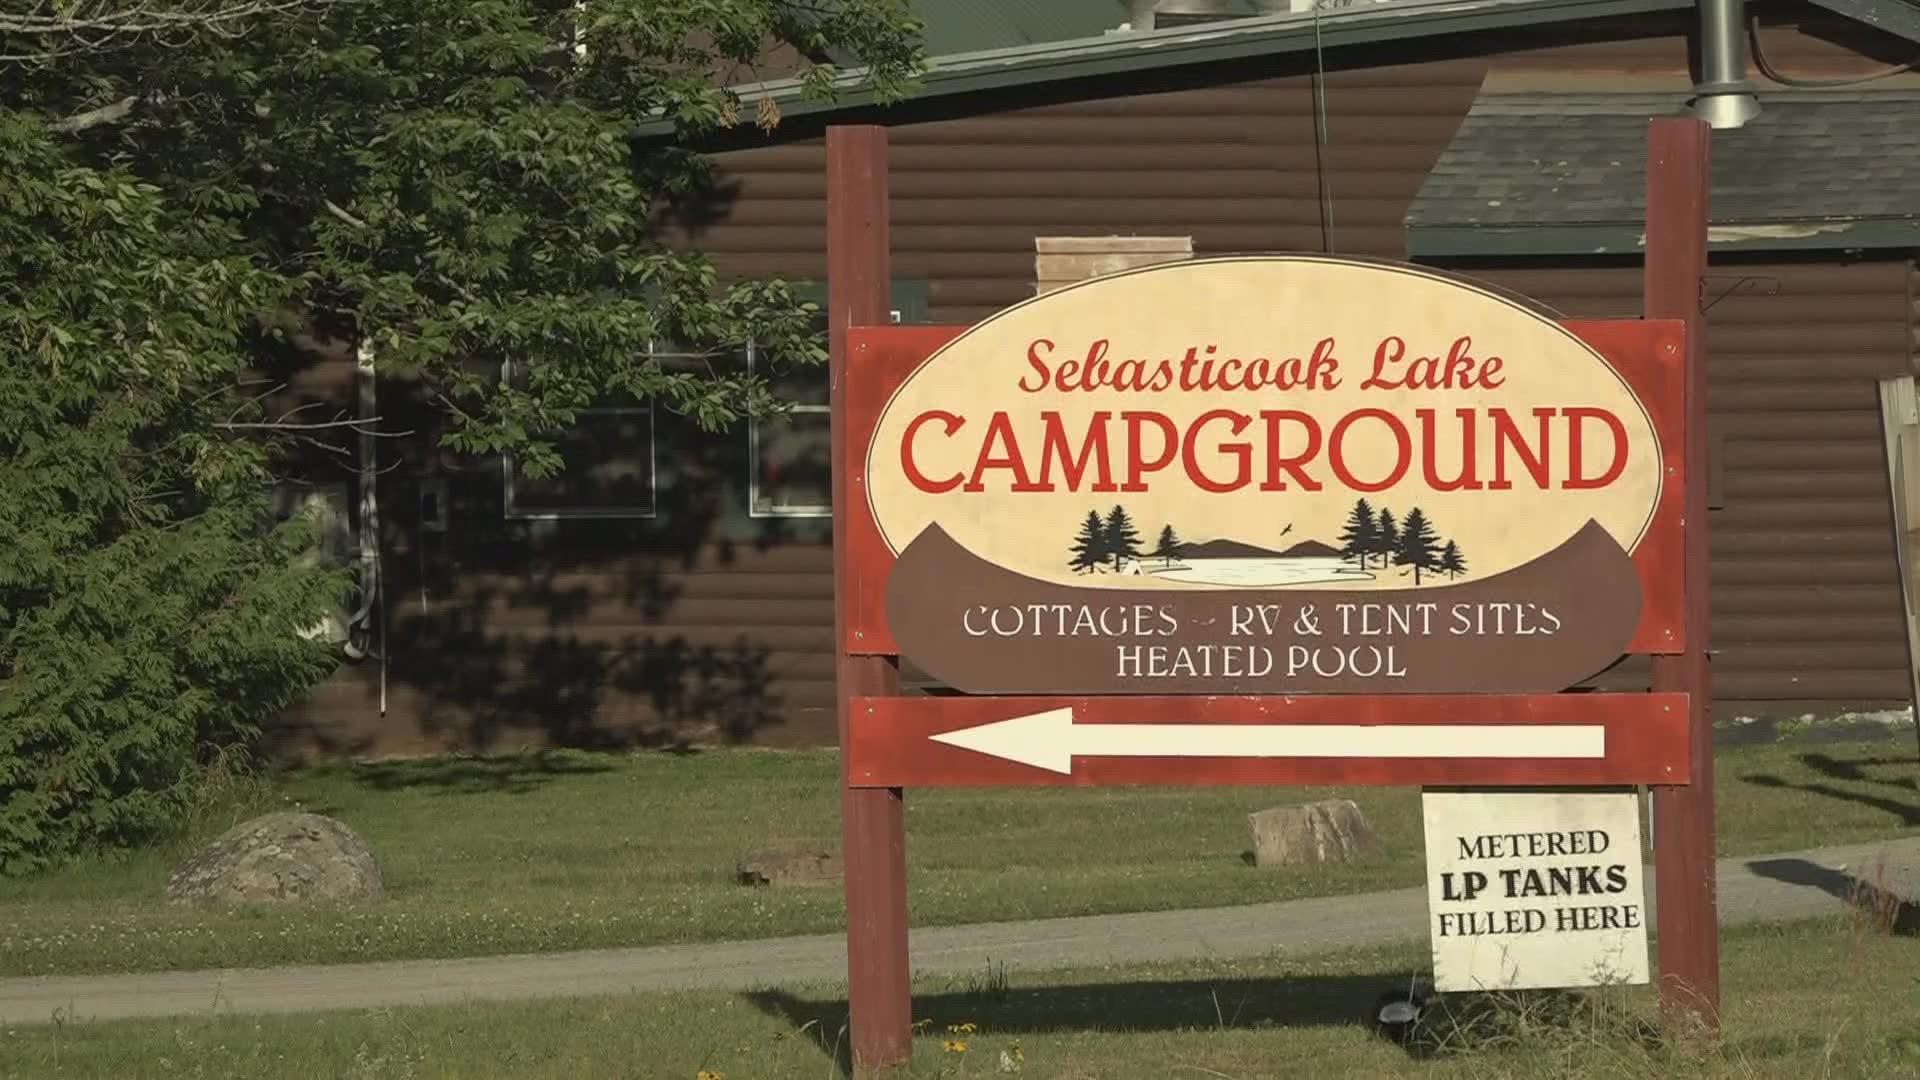 A 35-year-old man is dead after an armed confrontation with police at the Sebasticook Lake Campground in Newport on Friday, July 15.